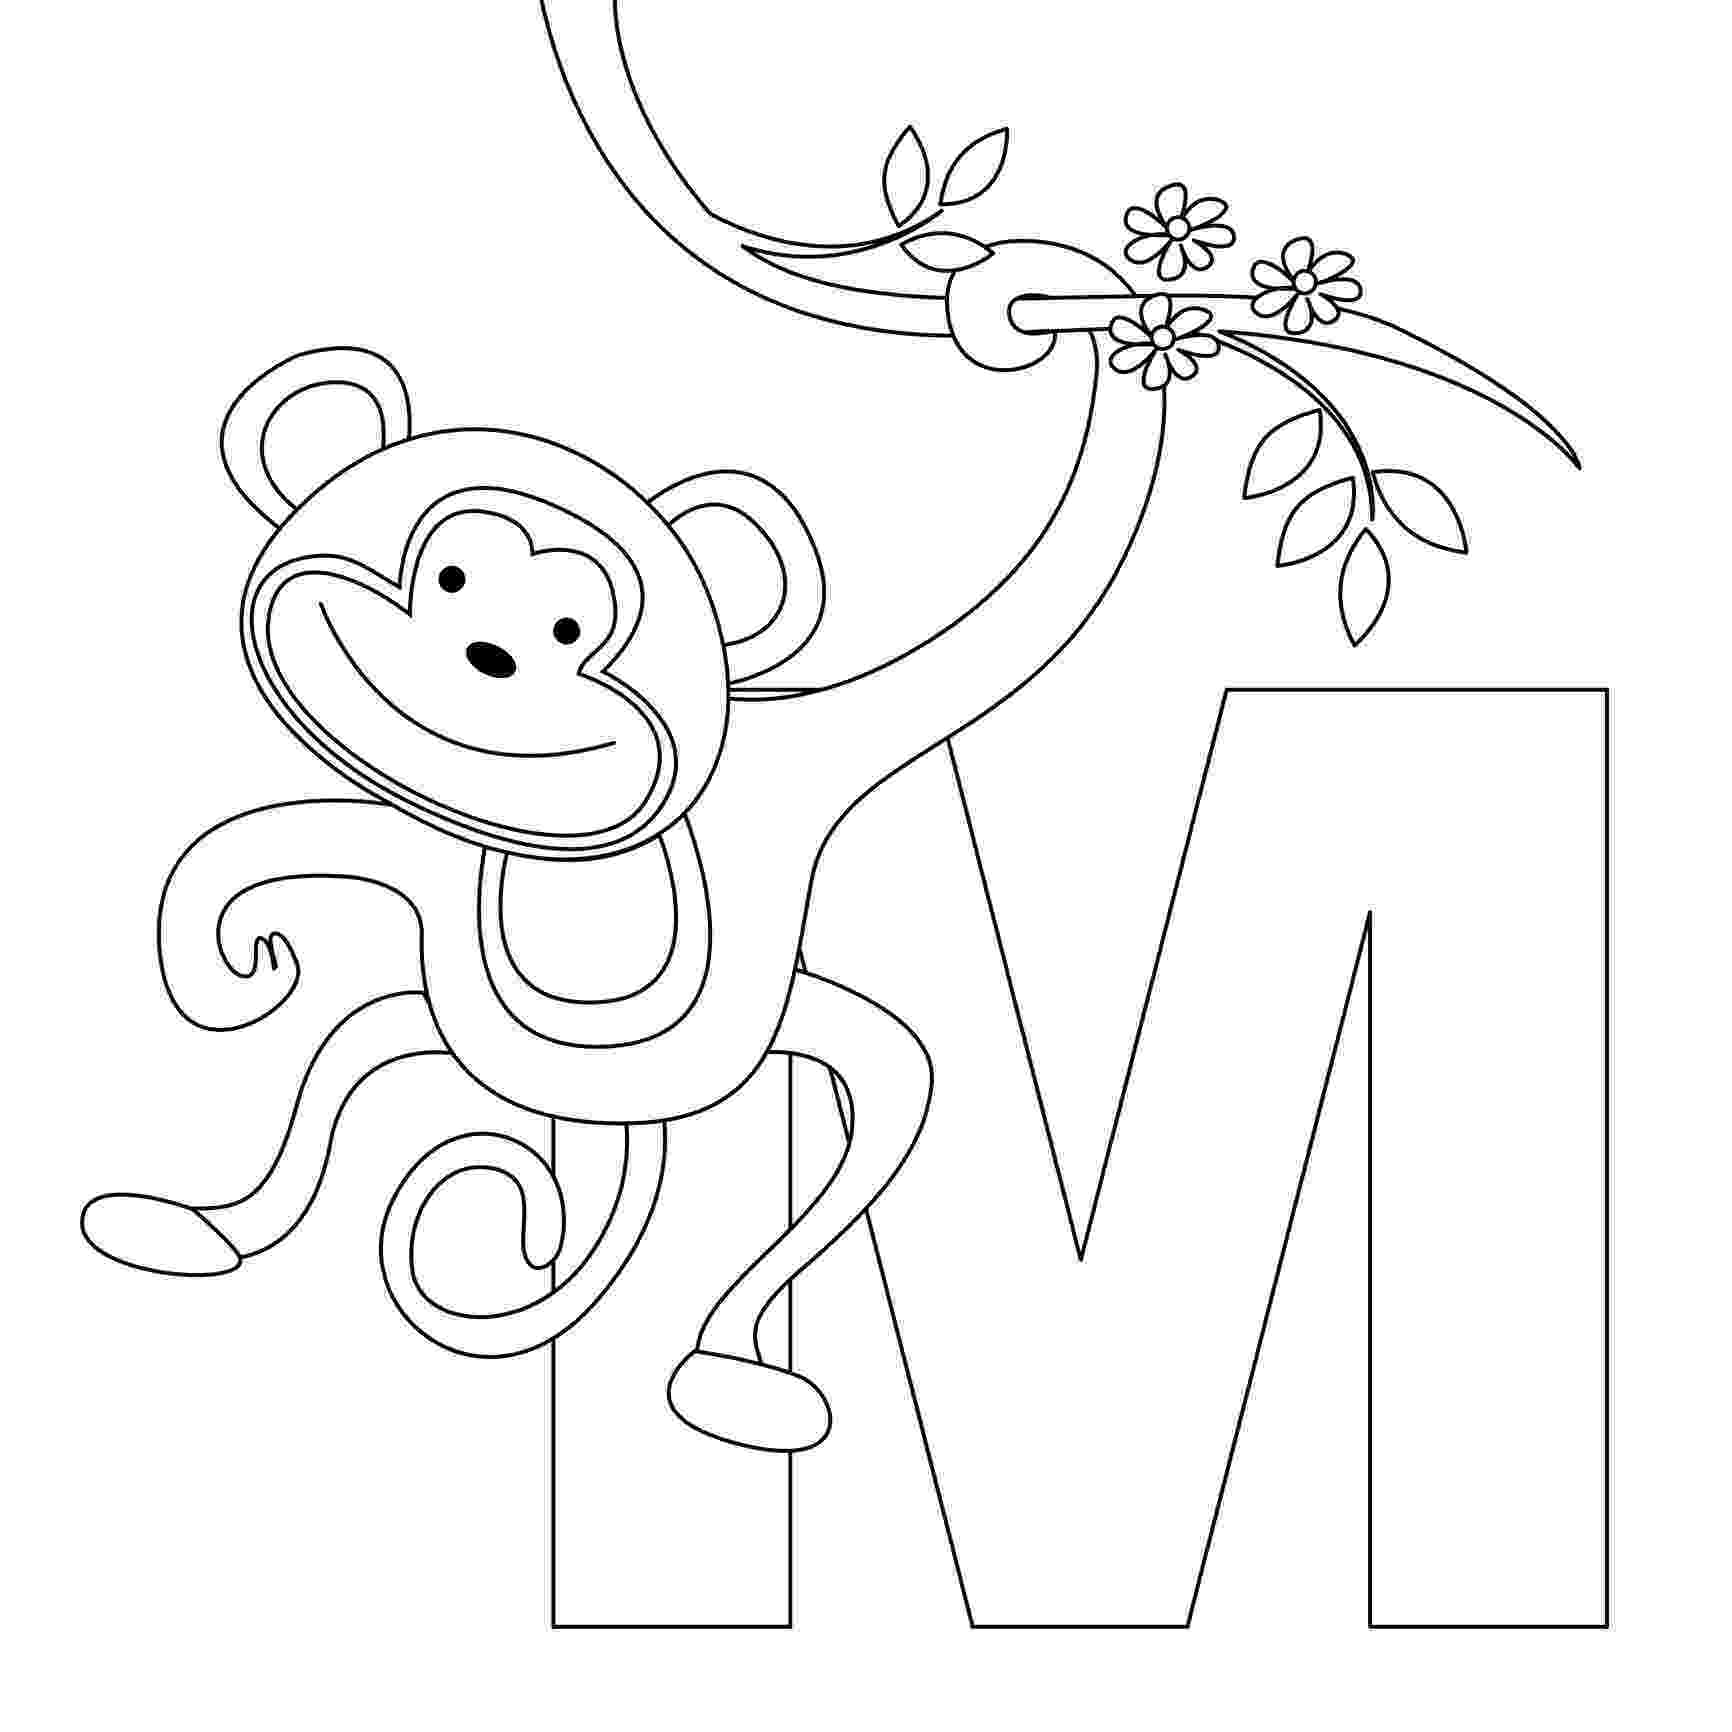 free printable alphabet letters coloring pages free printable alphabet coloring pages for kids best letters pages free coloring alphabet printable 